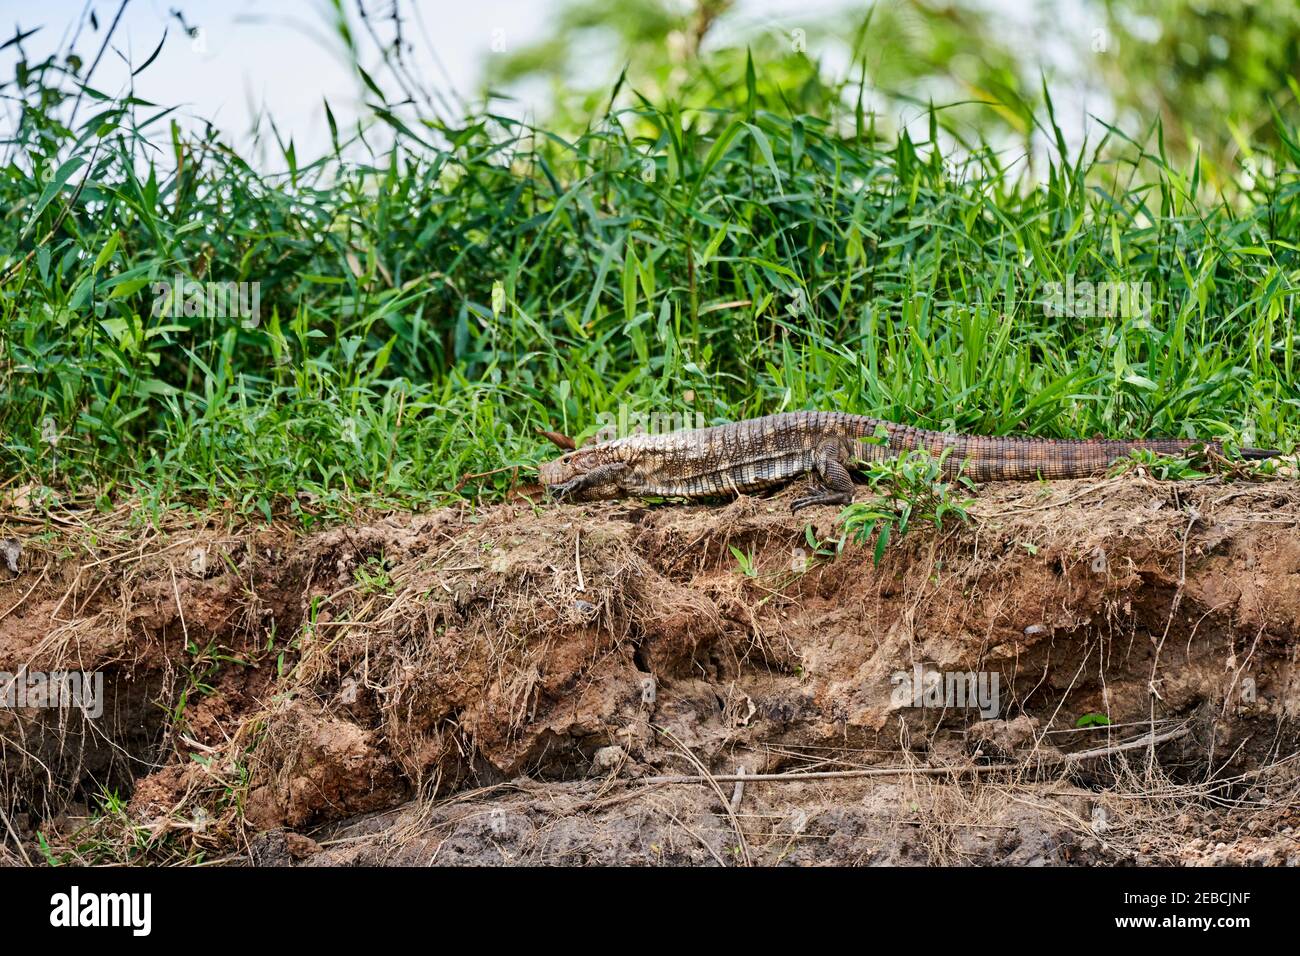 Dracaena paraguayensis, the Paraguay caiman lizard, a species of lizard in the family Teiidae, resting on the river bank of the Cuiaba river in the Pa Stock Photo